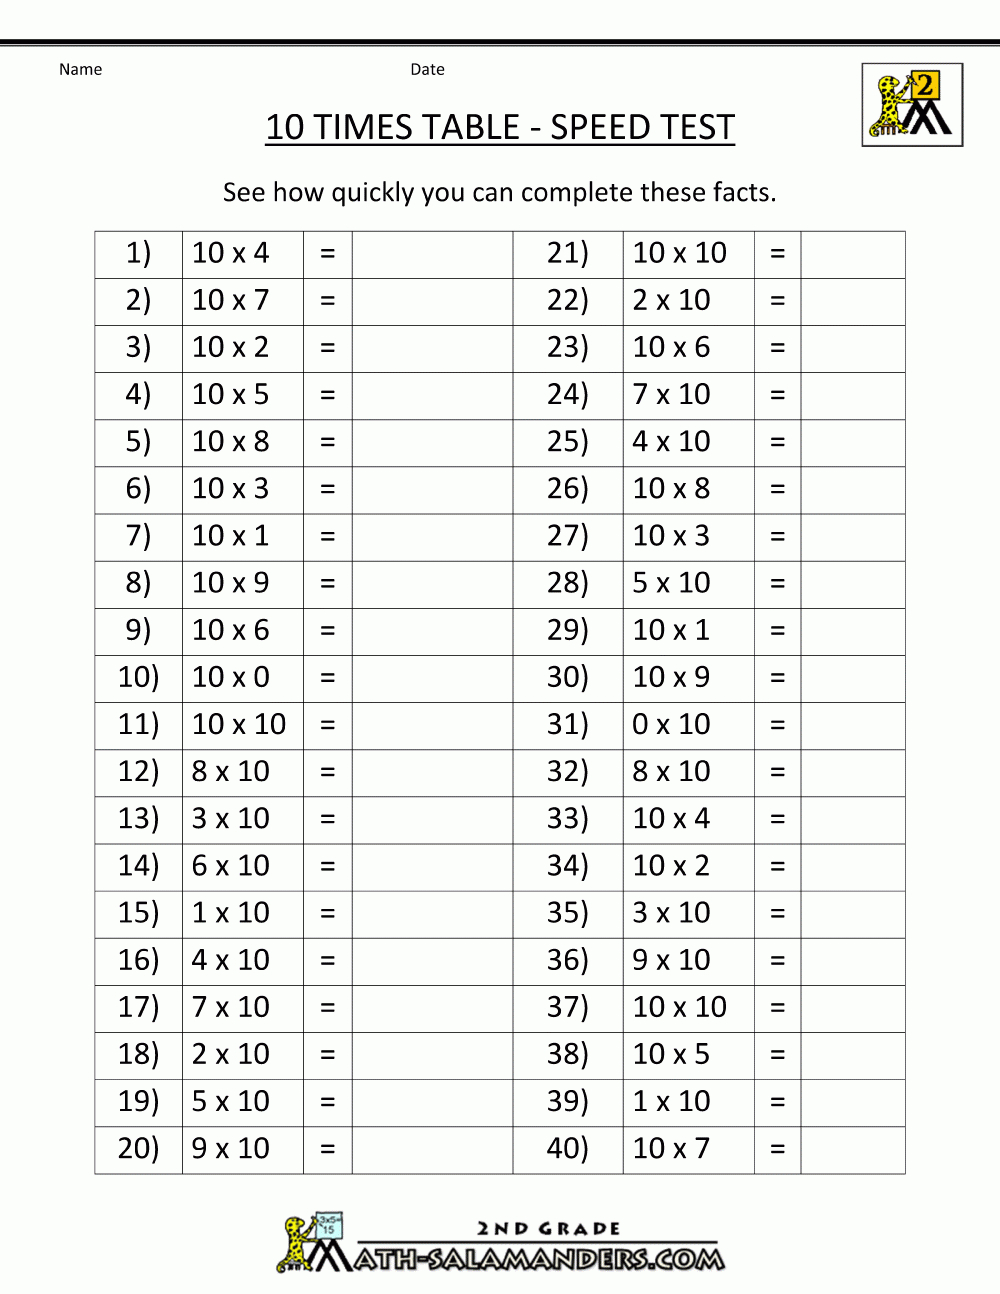 Multiplication Drill Sheets 10 Times Table Speed Test | Homeschool - Free Printable Multiplication Speed Drills